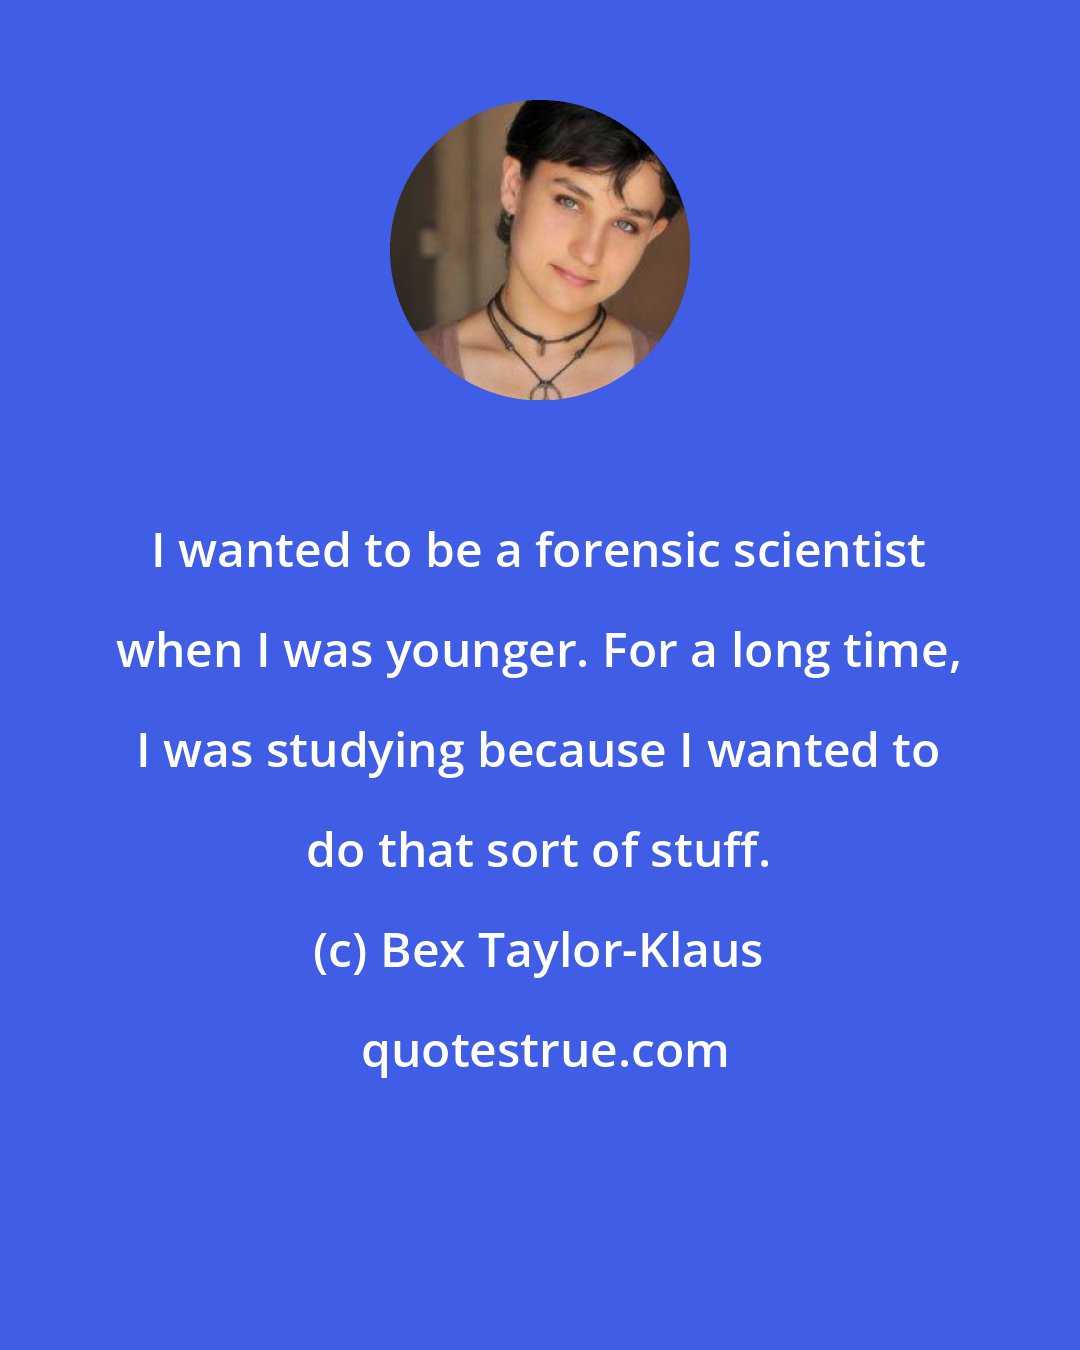 Bex Taylor-Klaus: I wanted to be a forensic scientist when I was younger. For a long time, I was studying because I wanted to do that sort of stuff.